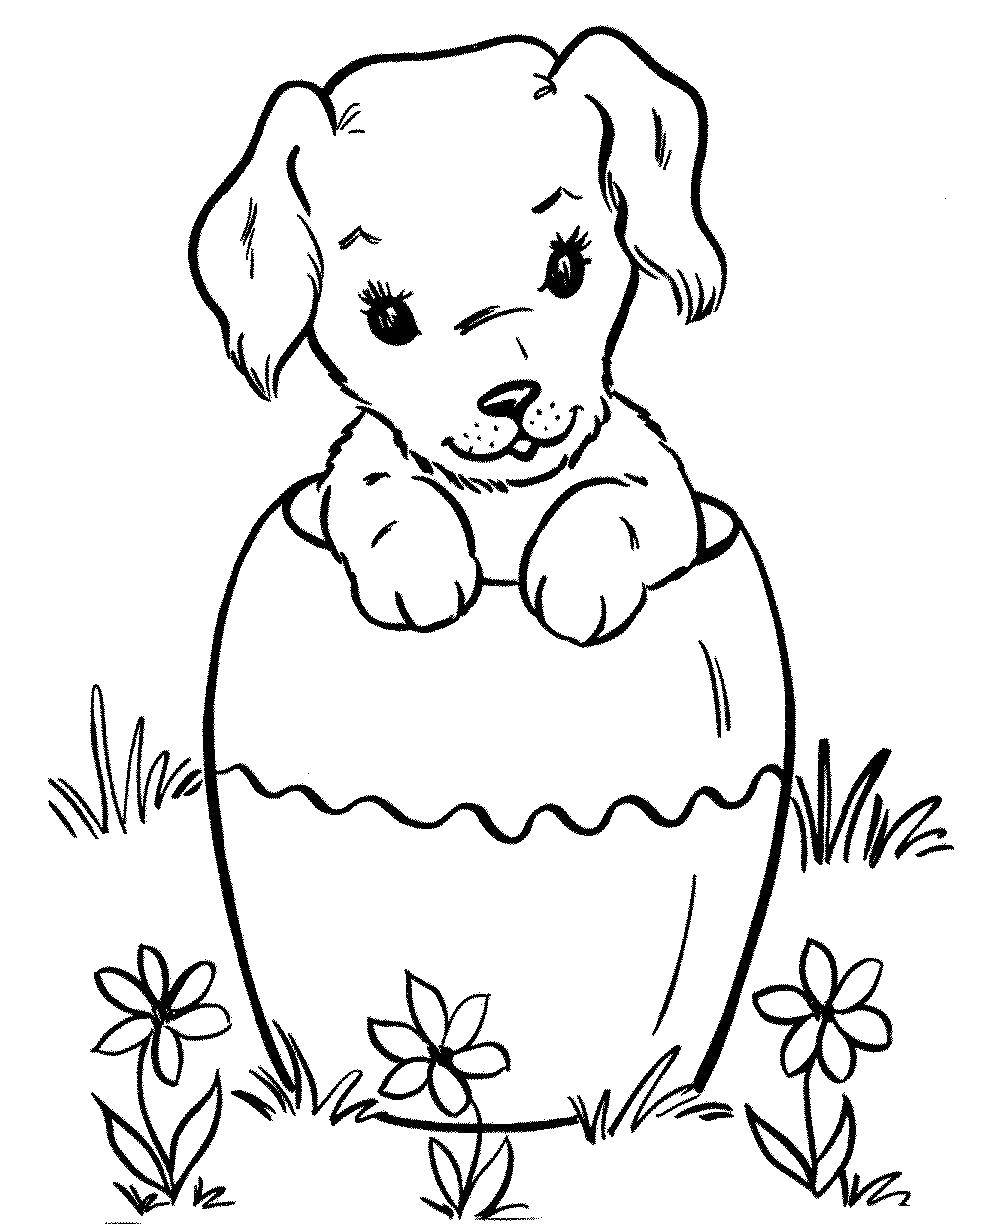 Coloring Dog in a barrel. Category Pets allowed. Tags:  the dog is played with a barrel, a dog and a barrel.